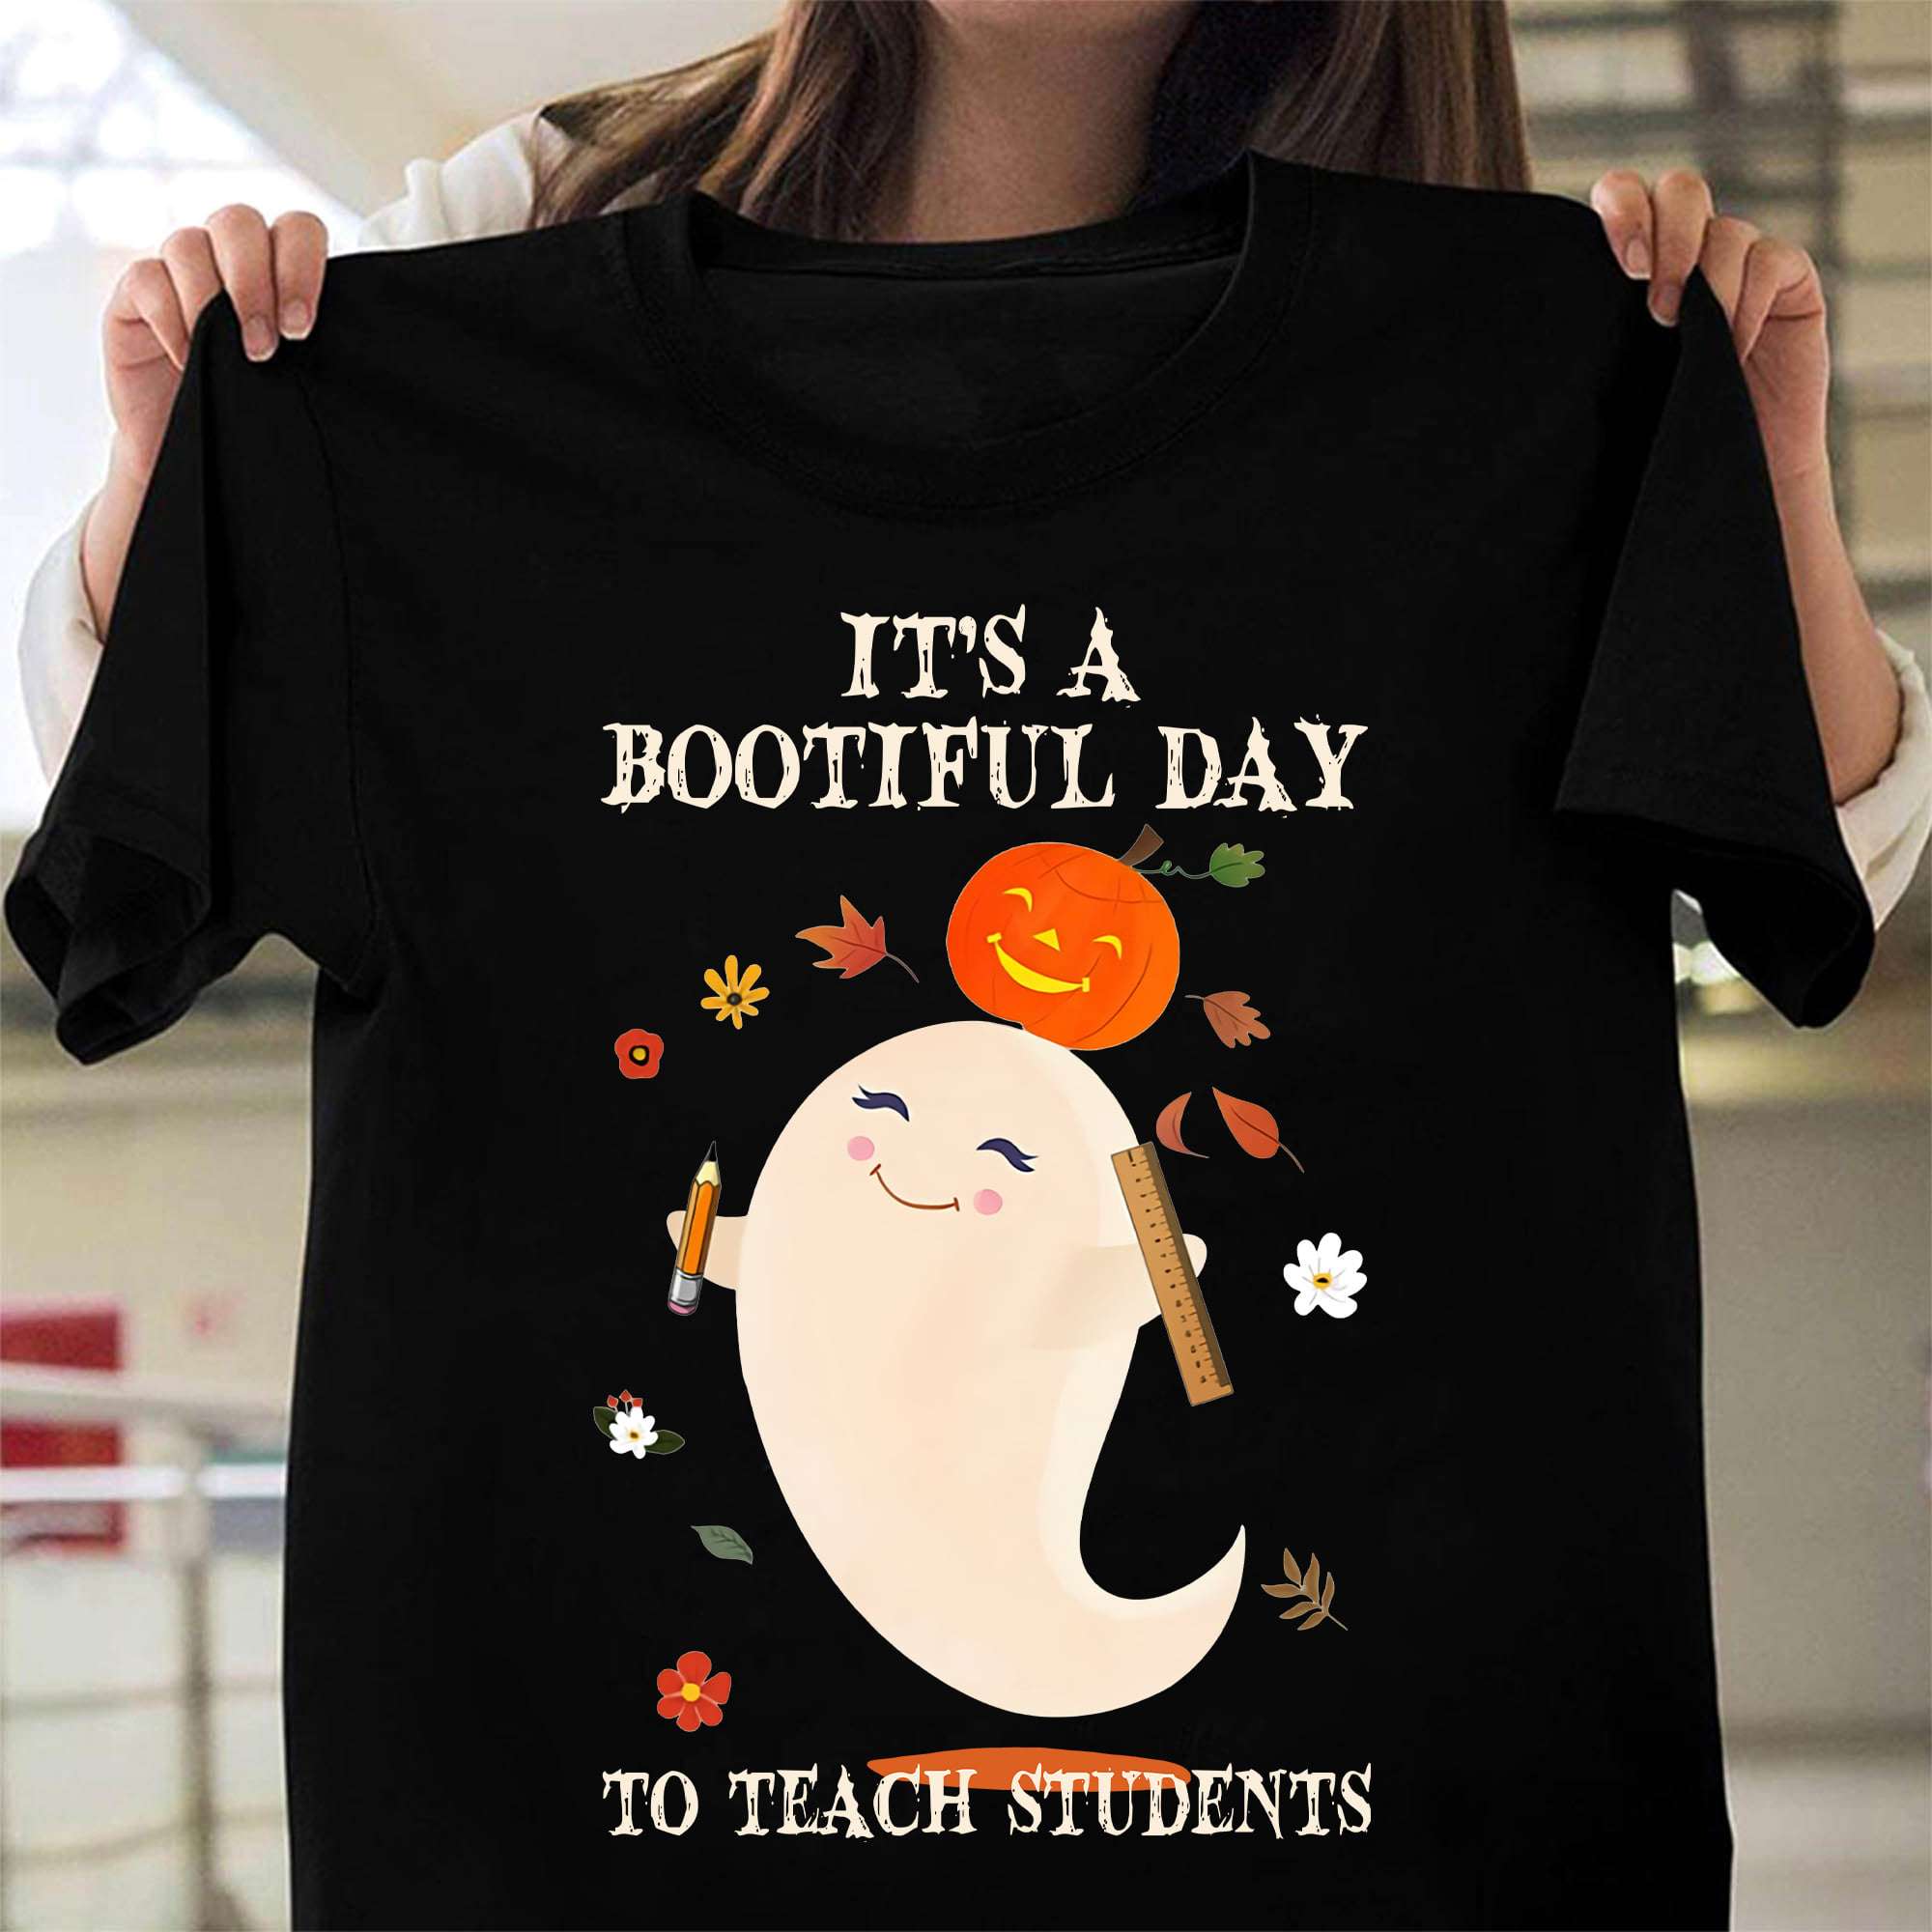 It's a bootiful day to teach students - Halloween white boo, teacher educational job